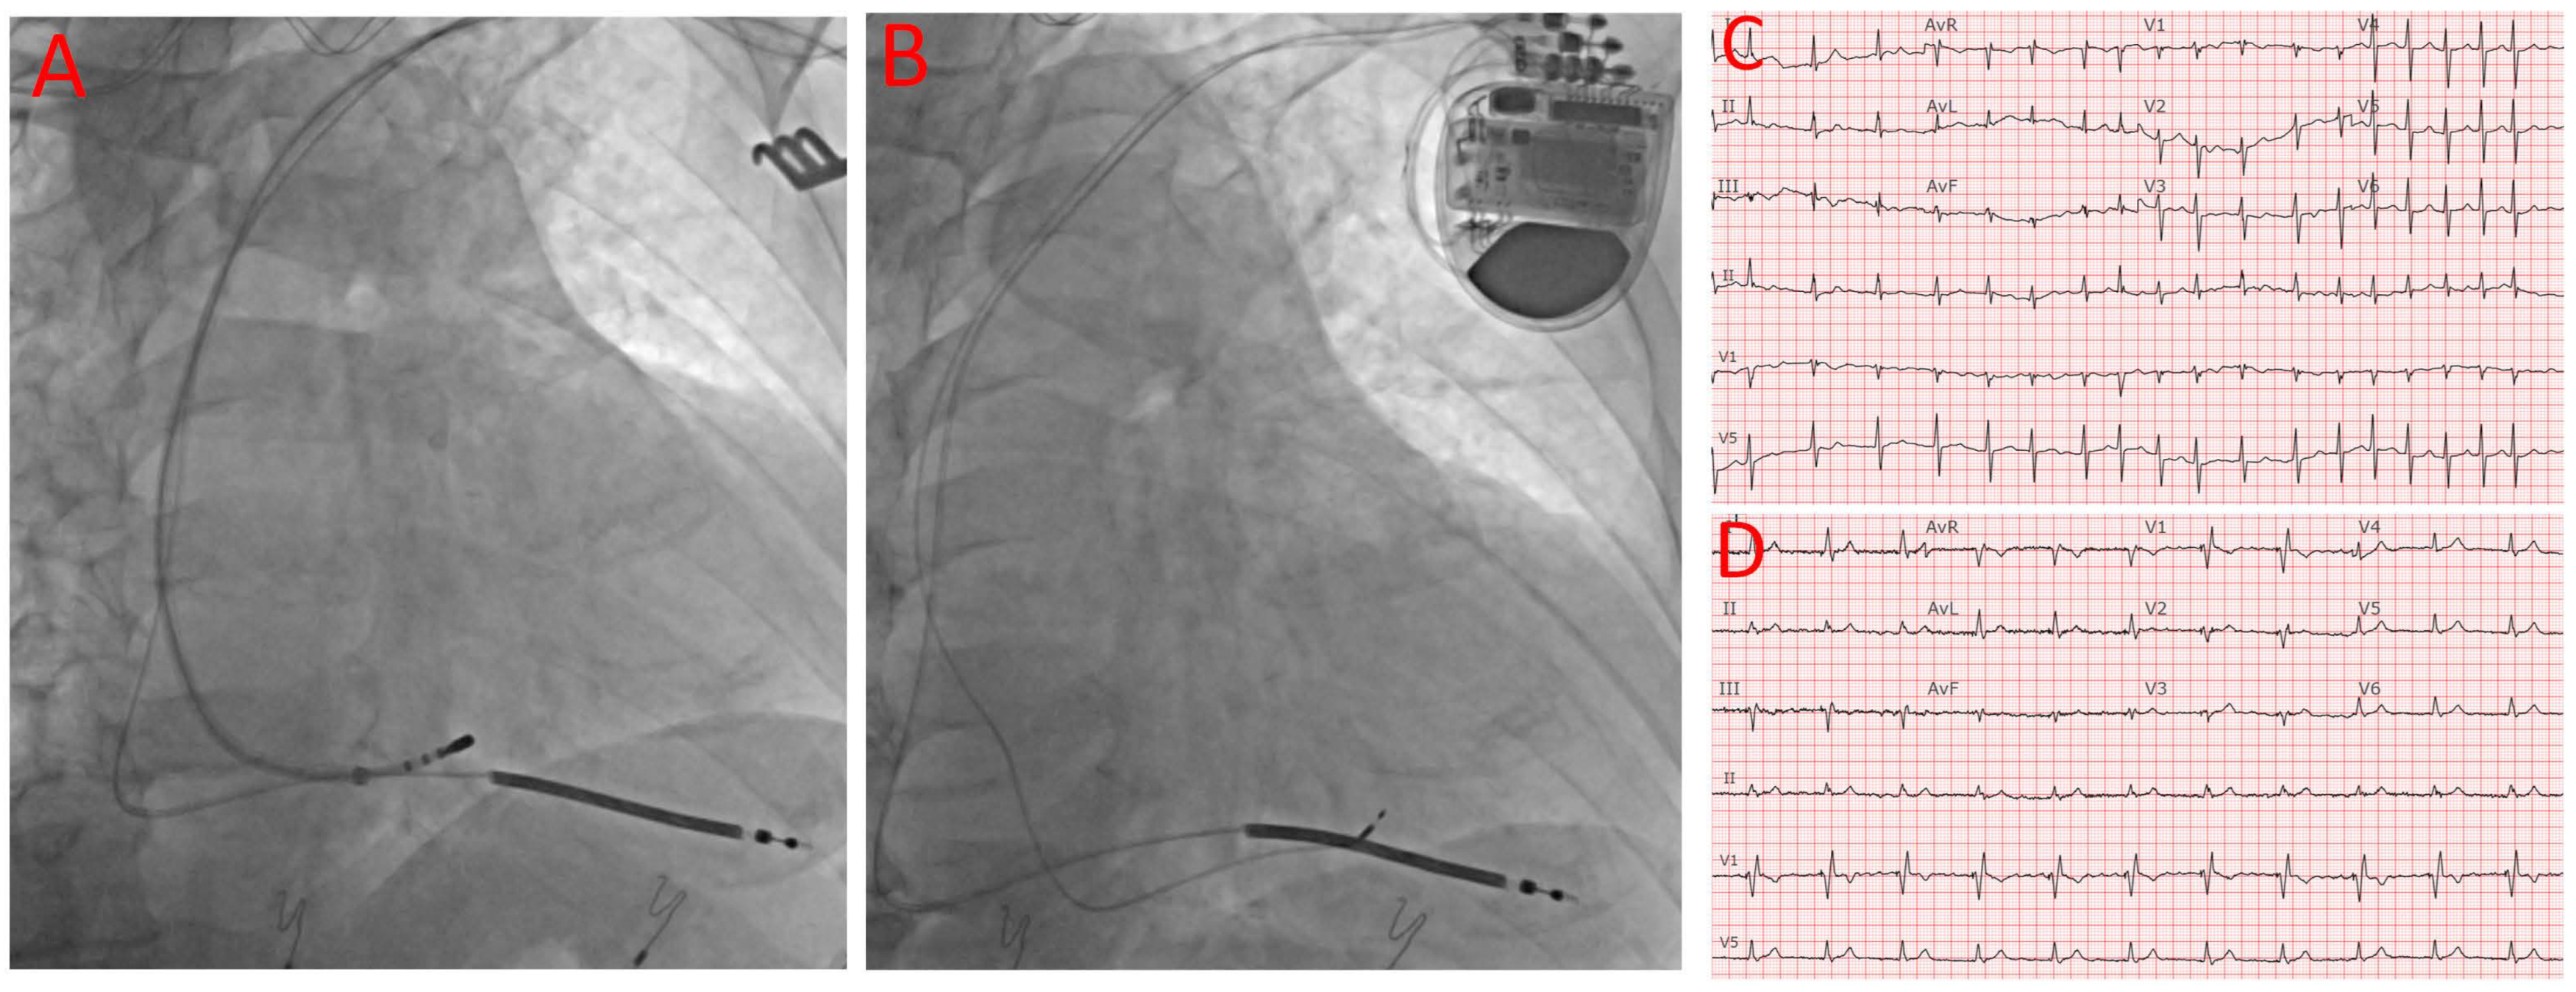 Combining aesthetics and feasibility in chest port placement